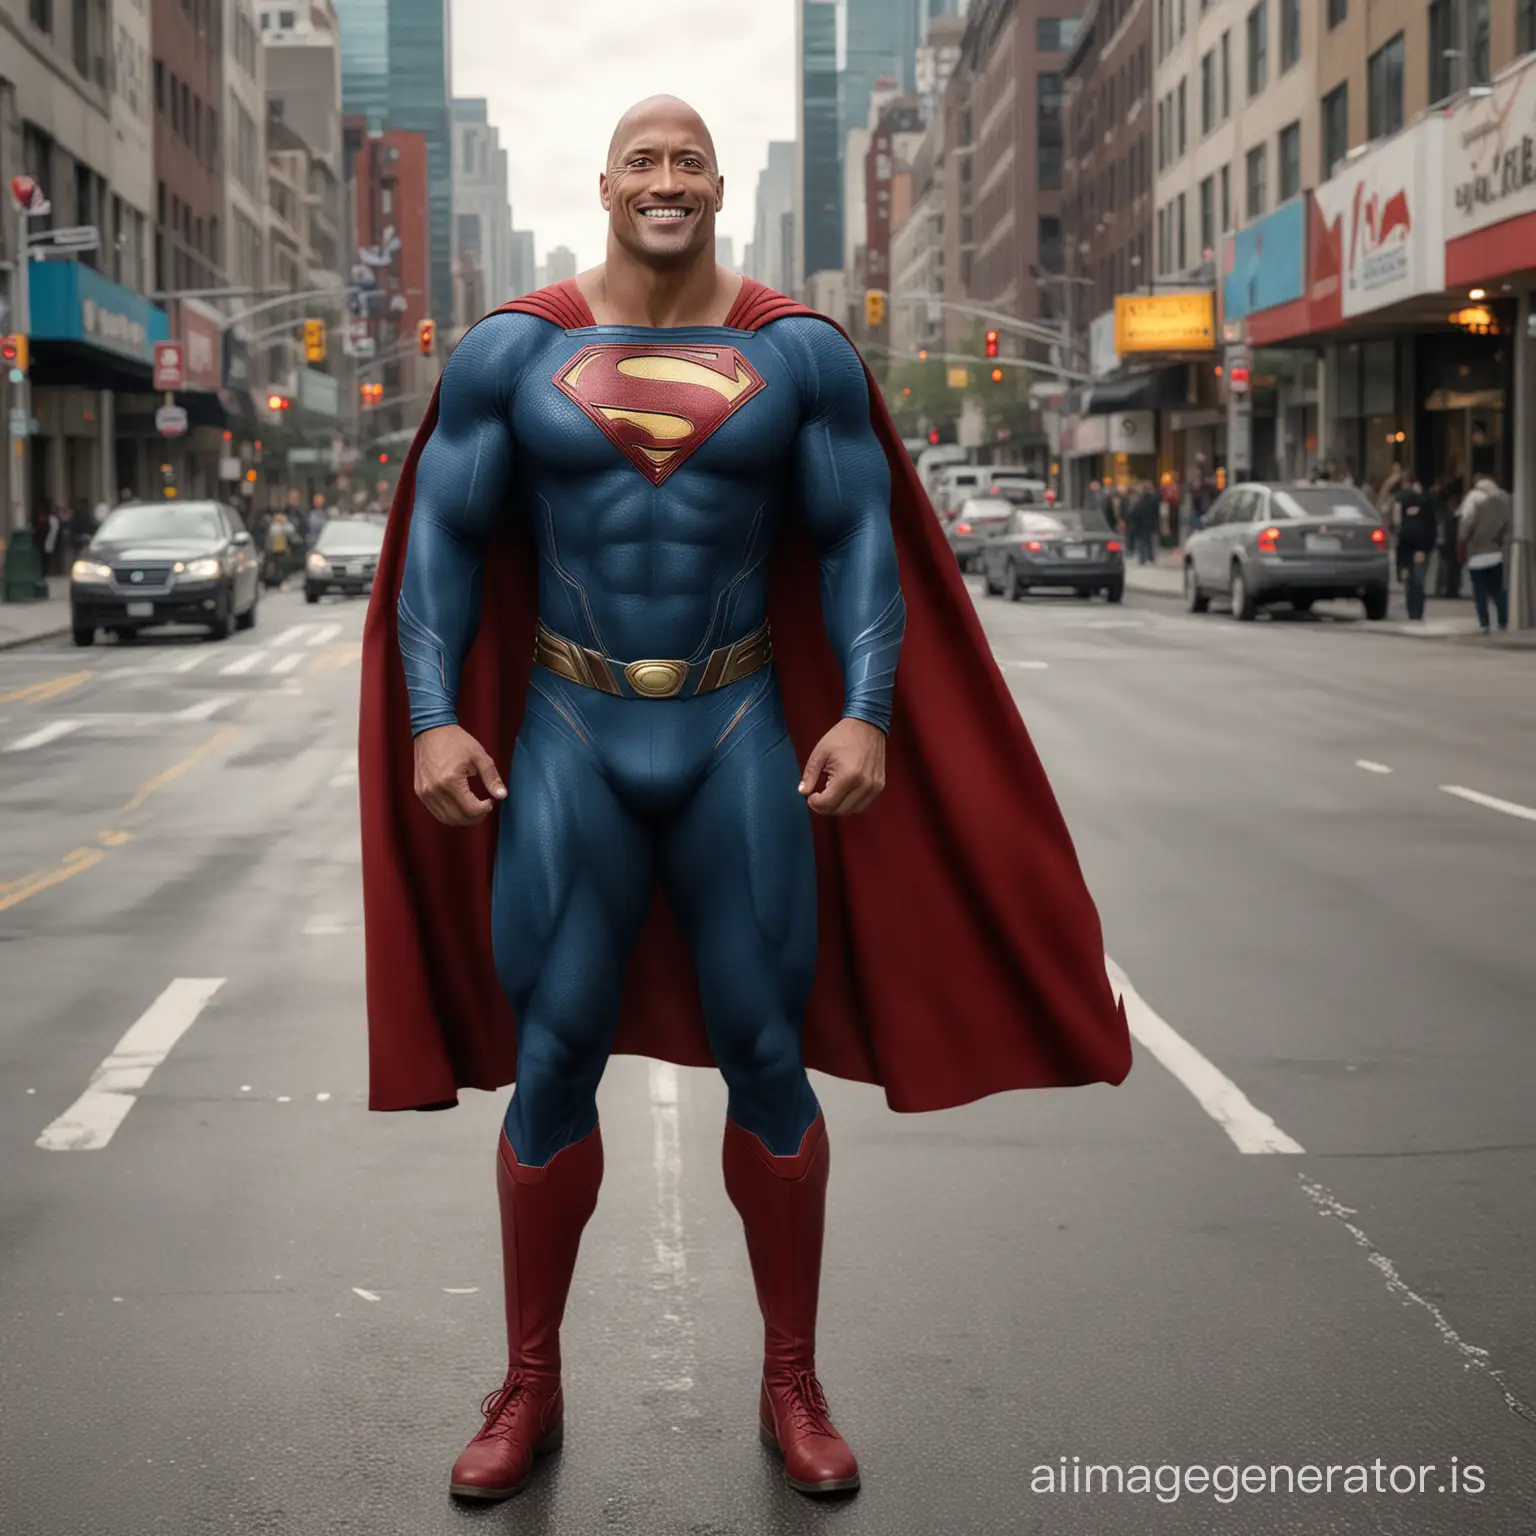 Dwayne-Johnson-in-Superman-Outfit-on-a-Busy-Canadian-Street